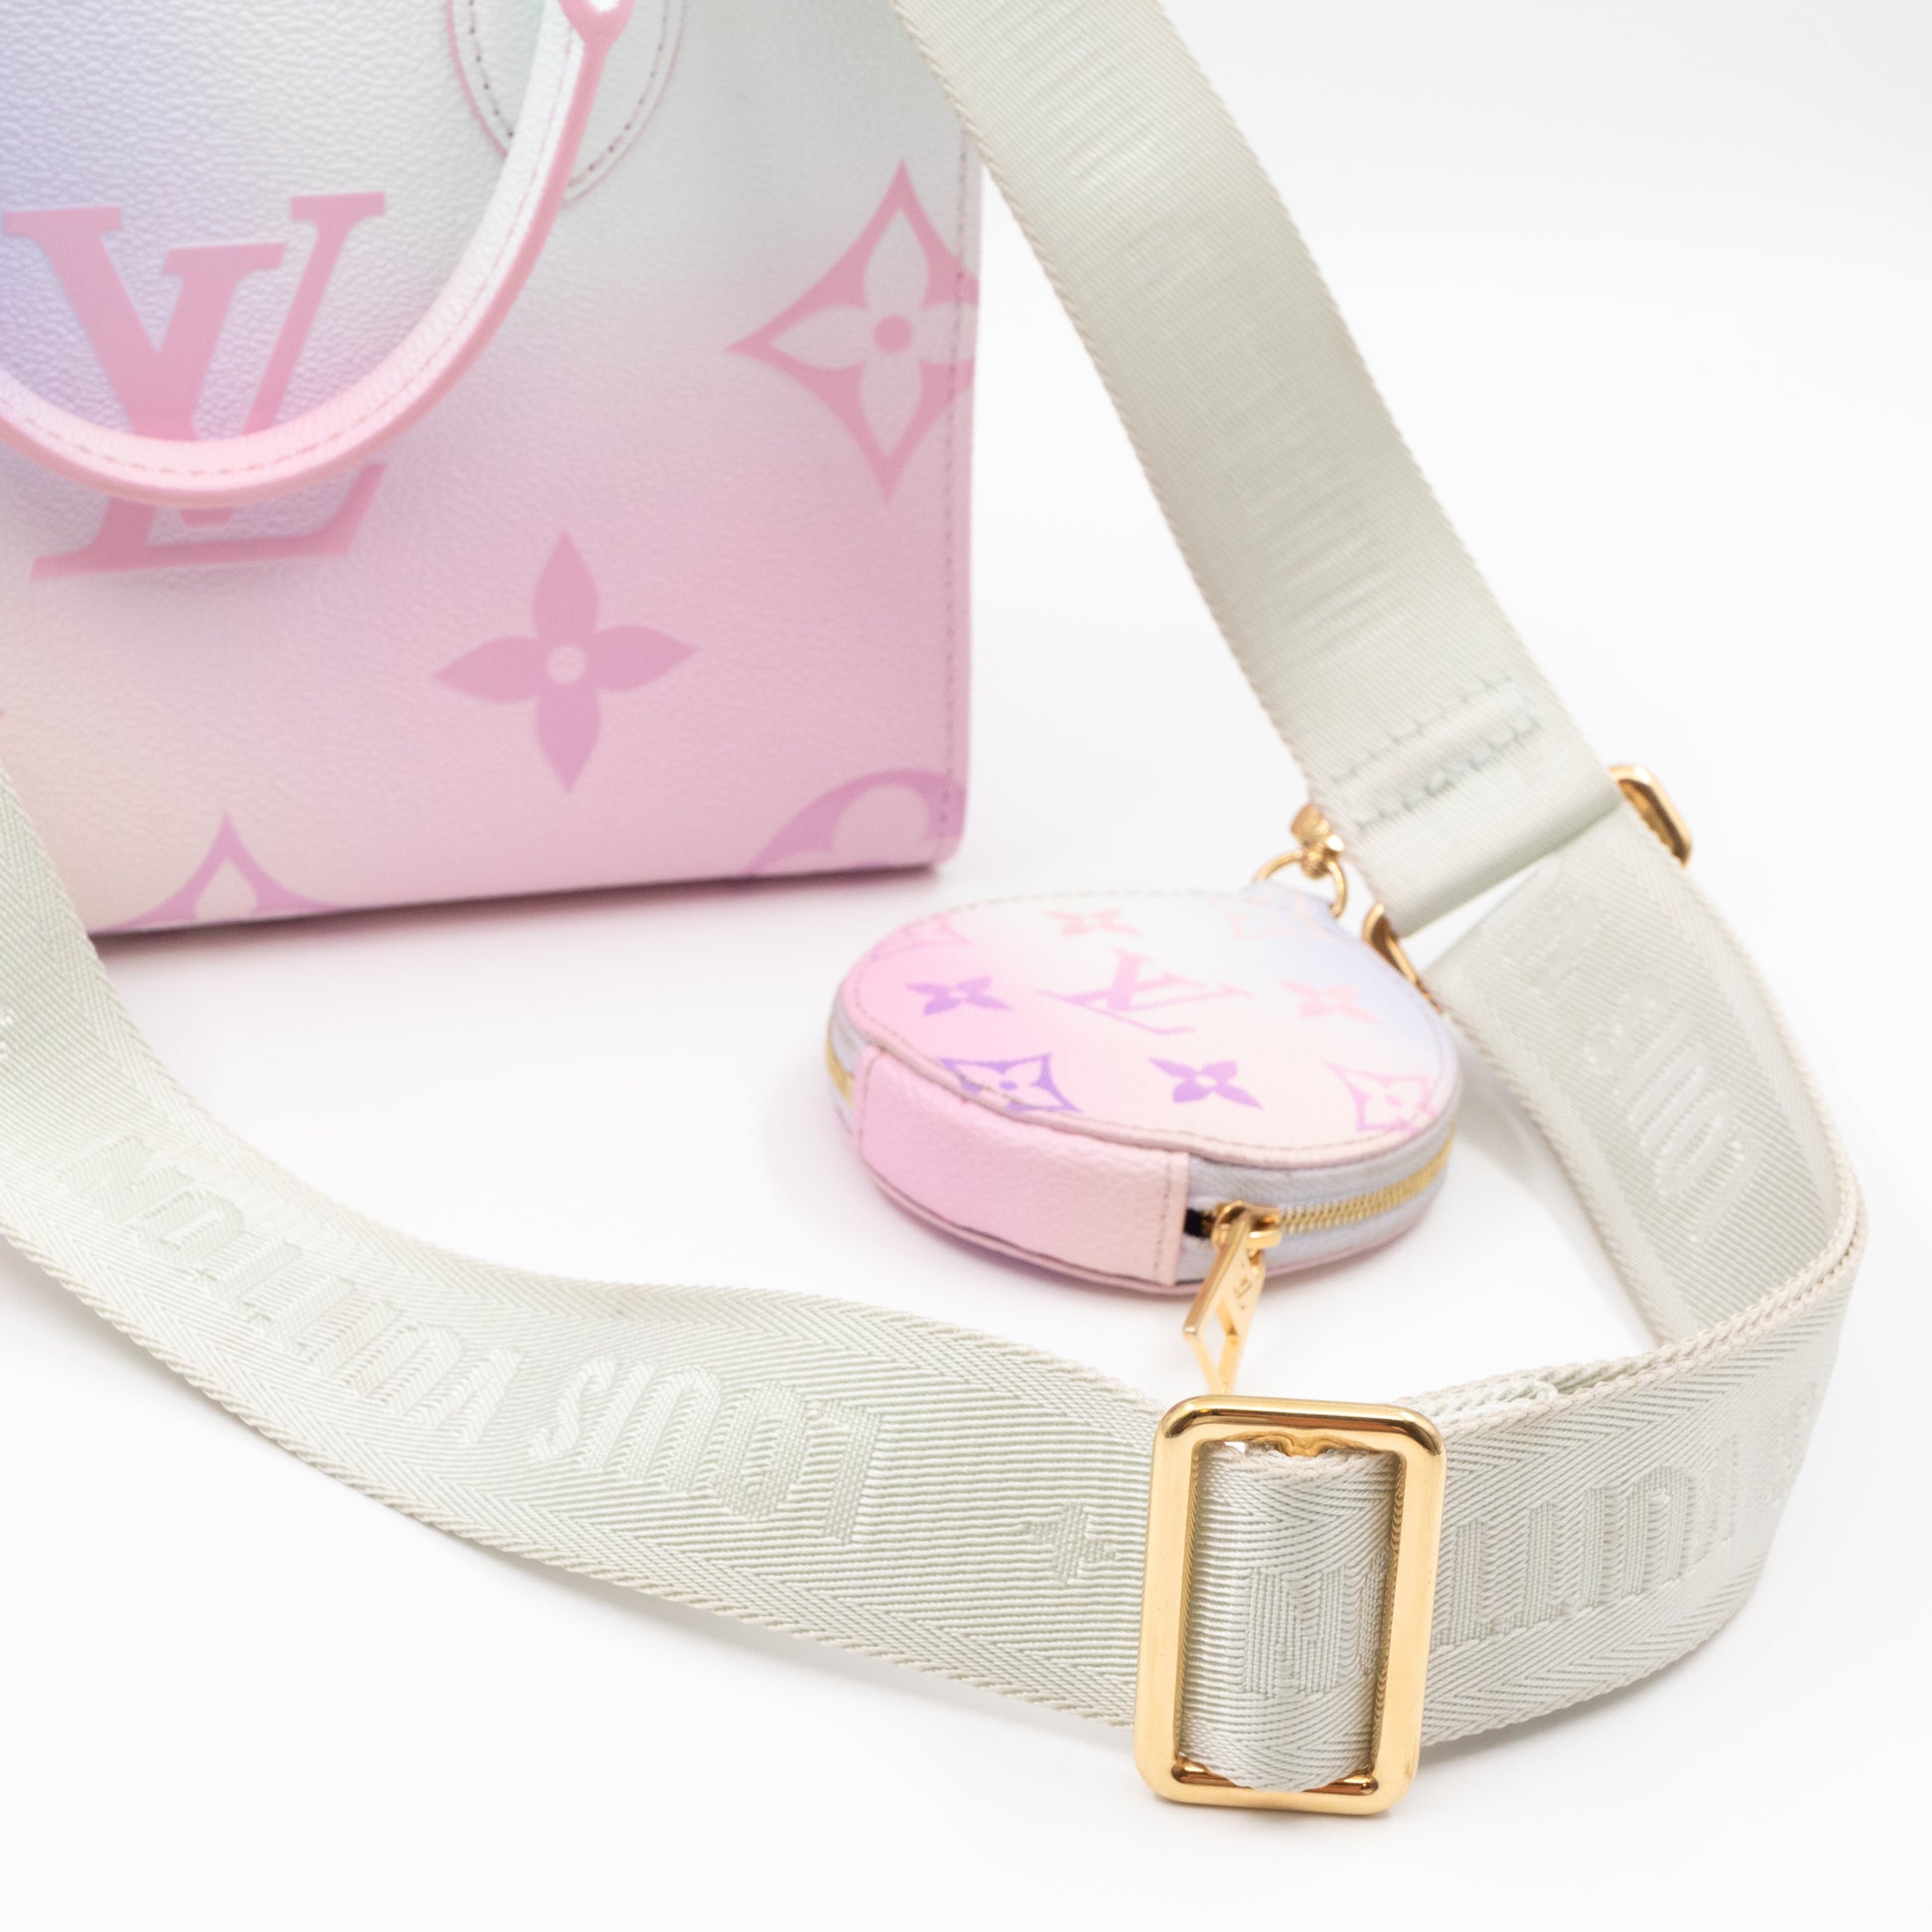 Louis Vuitton OnTheGo PM Spring In The City Monogram Sunrise now